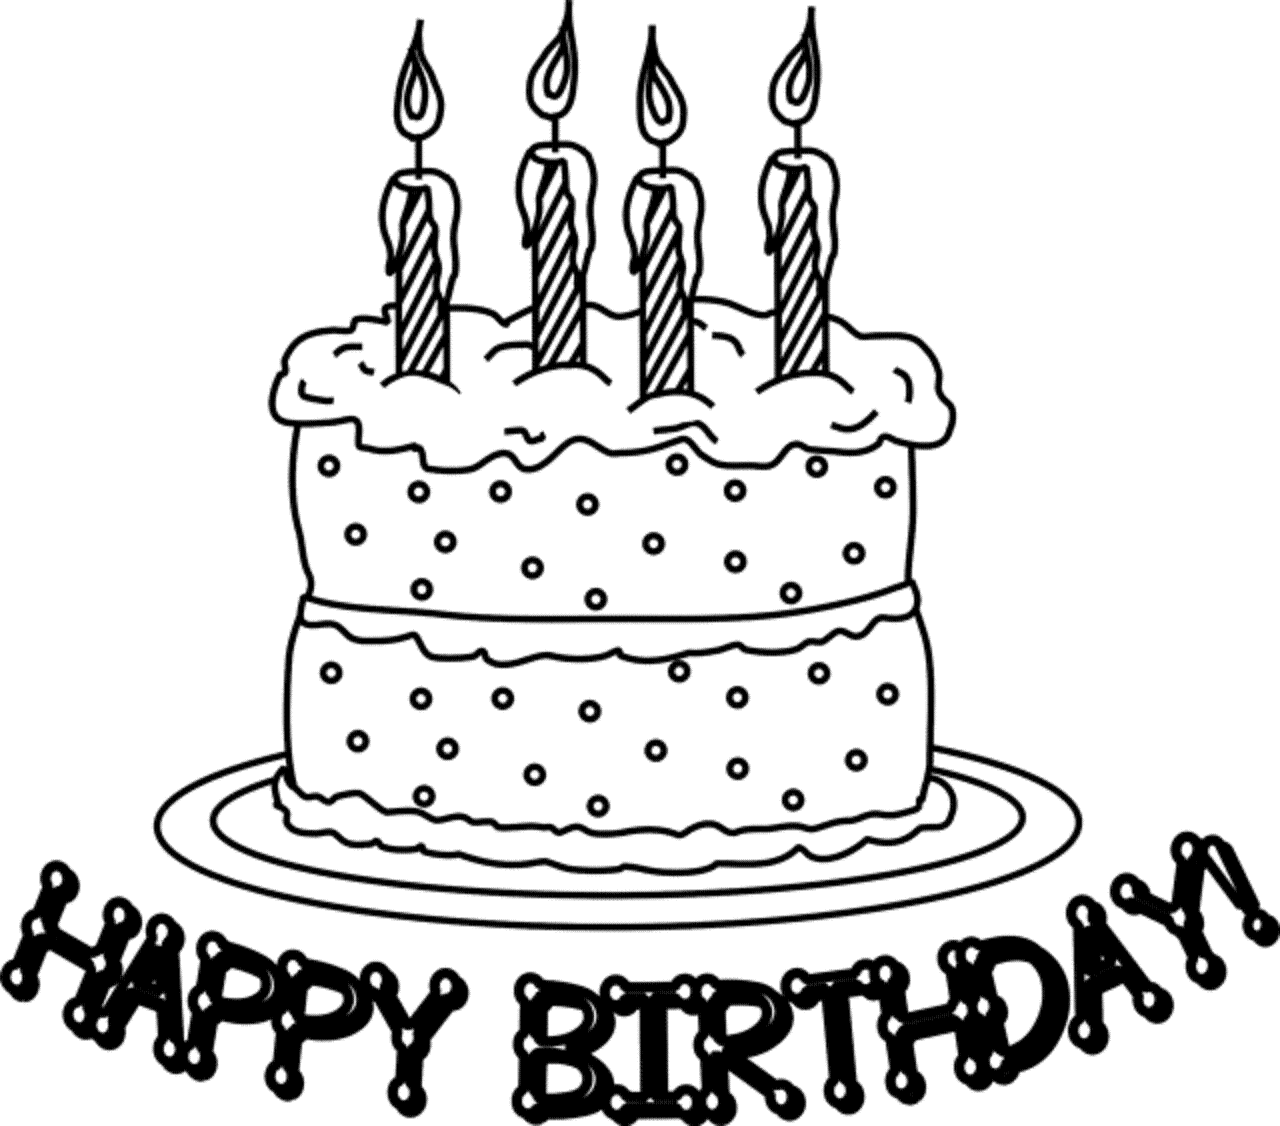 Cake for Birthday Coloring Page